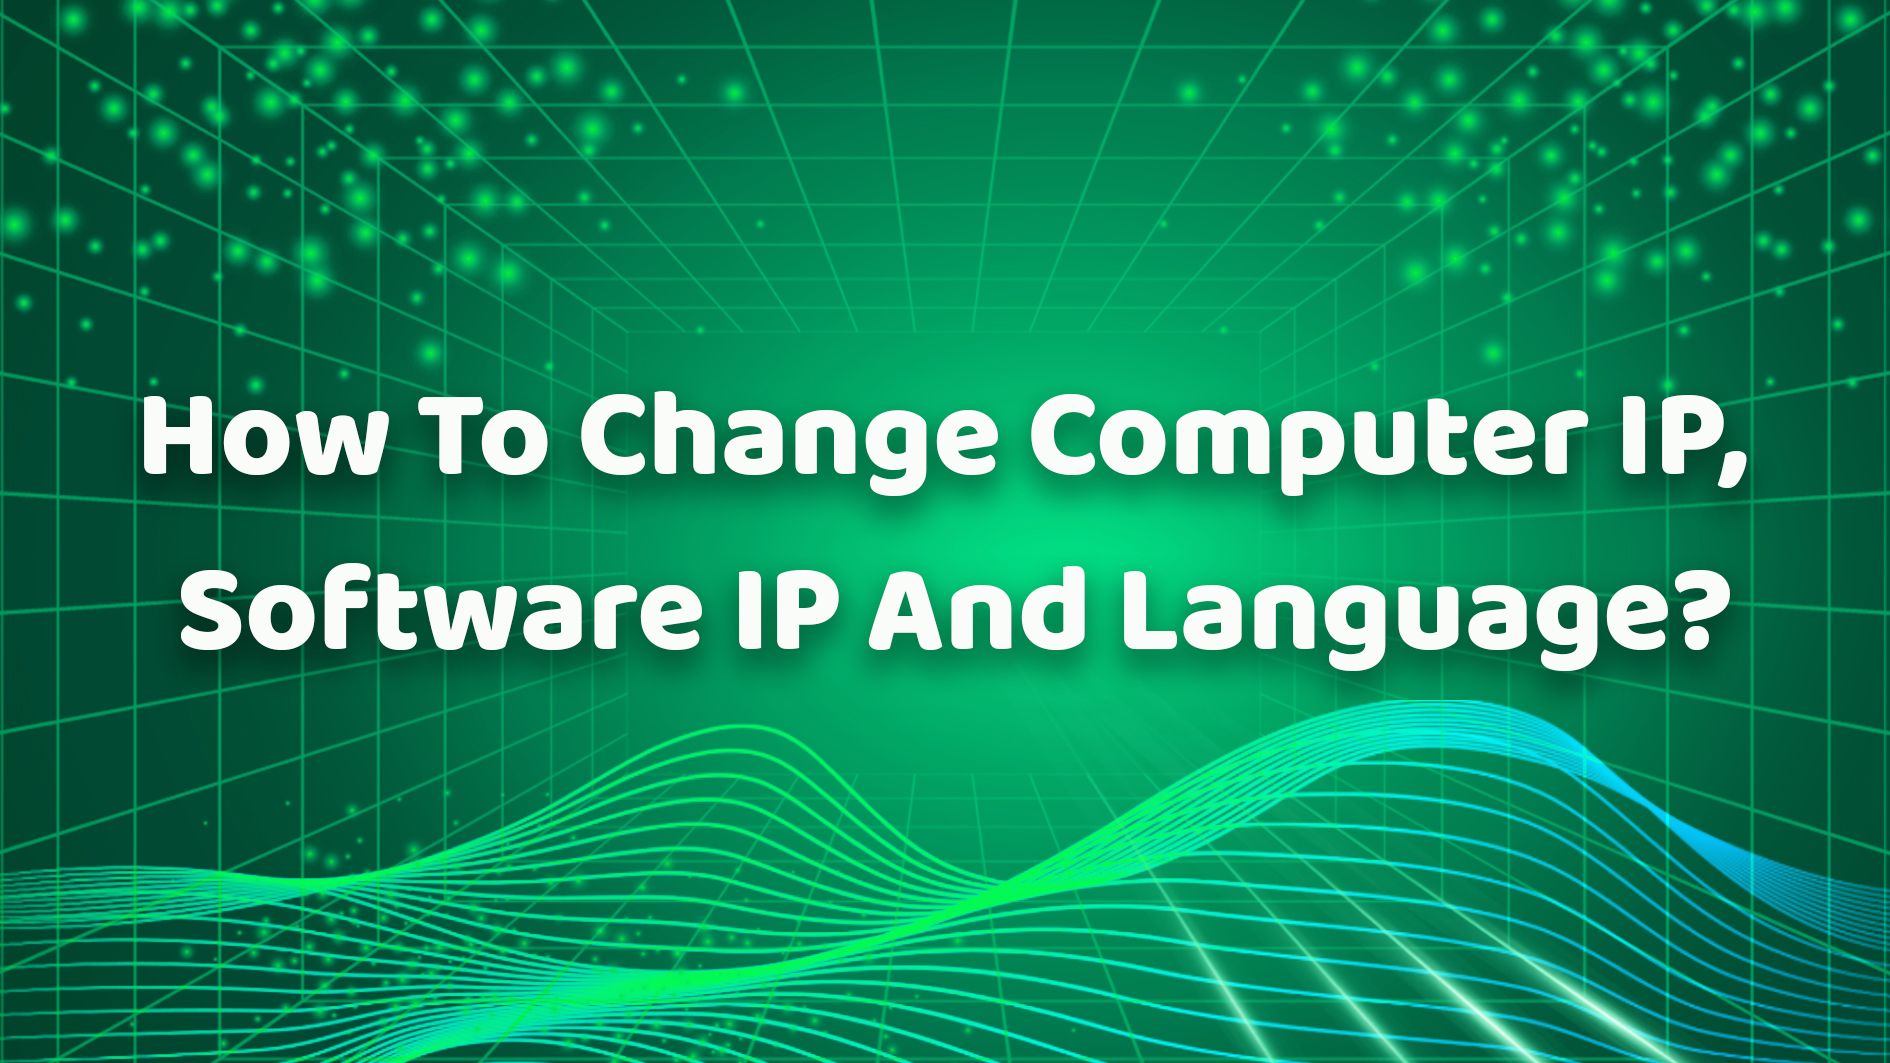 How To Change Computer IP, Software IP And Language?